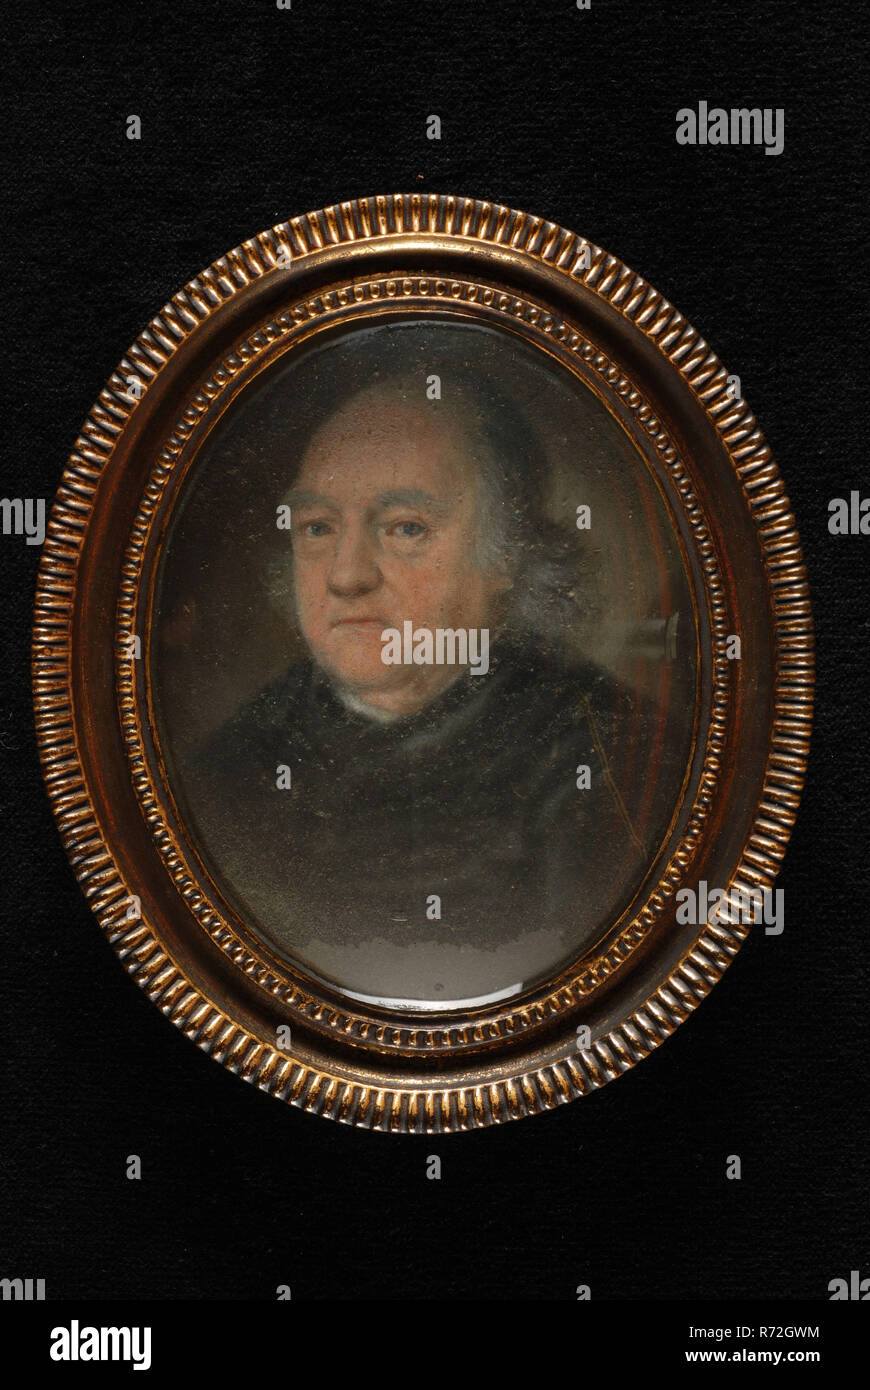 Johannes Anspach, Portrait miniature, bust of Mr. Herman Nederburgh, portrait miniature painting footage gold wood crayon? glass parchment support (daily size), Oval gilded metal decorative frame with knitted edge attached to wooden frame; inside oval man's portrait behind very round glass slide pensionaris Rotterdam Herman Nederburgh Stock Photo